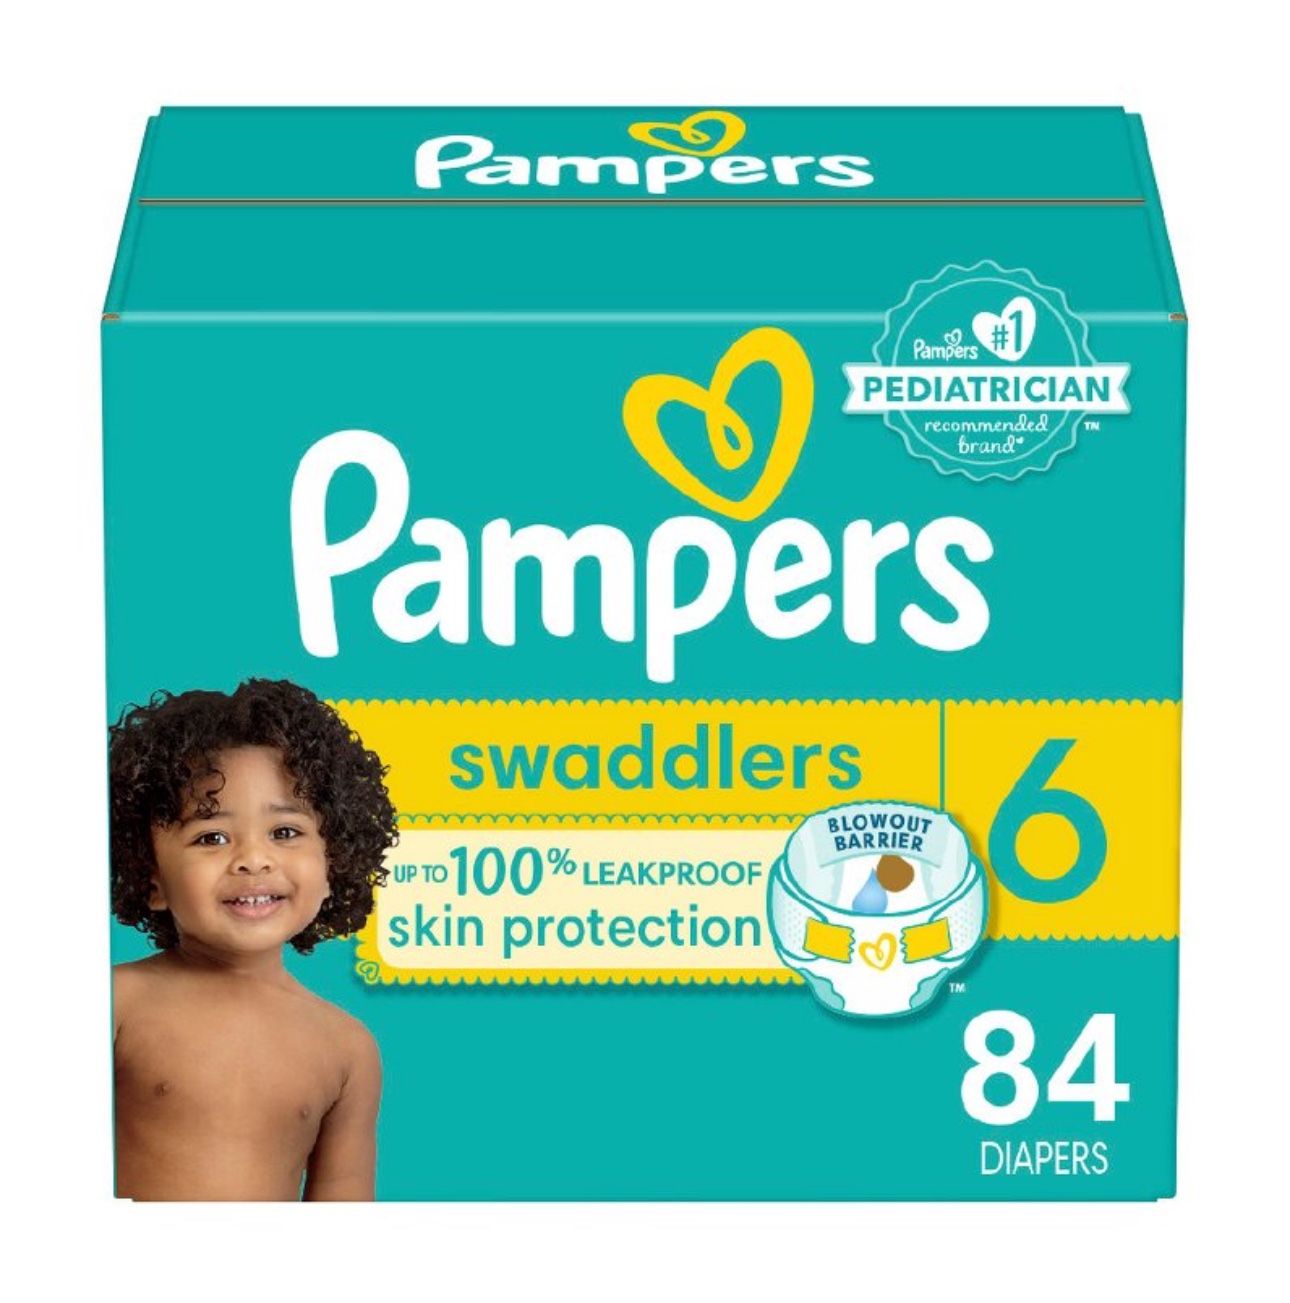 Pampers Brand new Size 6